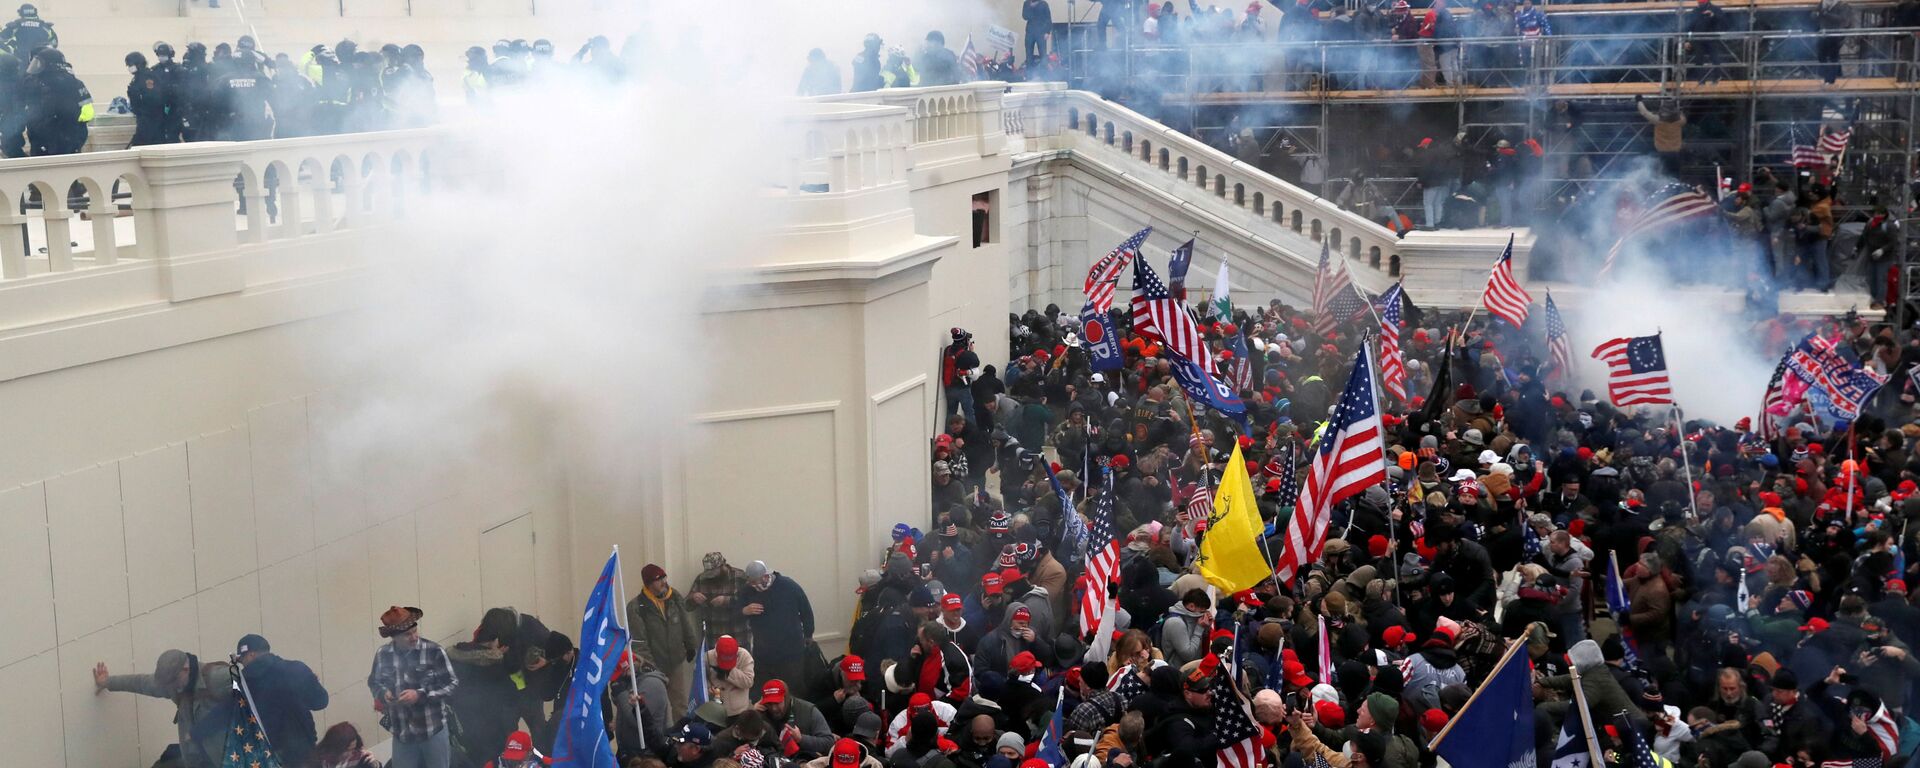 Police release tear gas into a crowd of pro-Trump protesters during clashes at a rally to contest the certification of the 2020 U.S. presidential election results by the U.S. Congress, at the U.S. Capitol Building in Washington, U.S, January 6, 2021. - Sputnik International, 1920, 21.05.2021